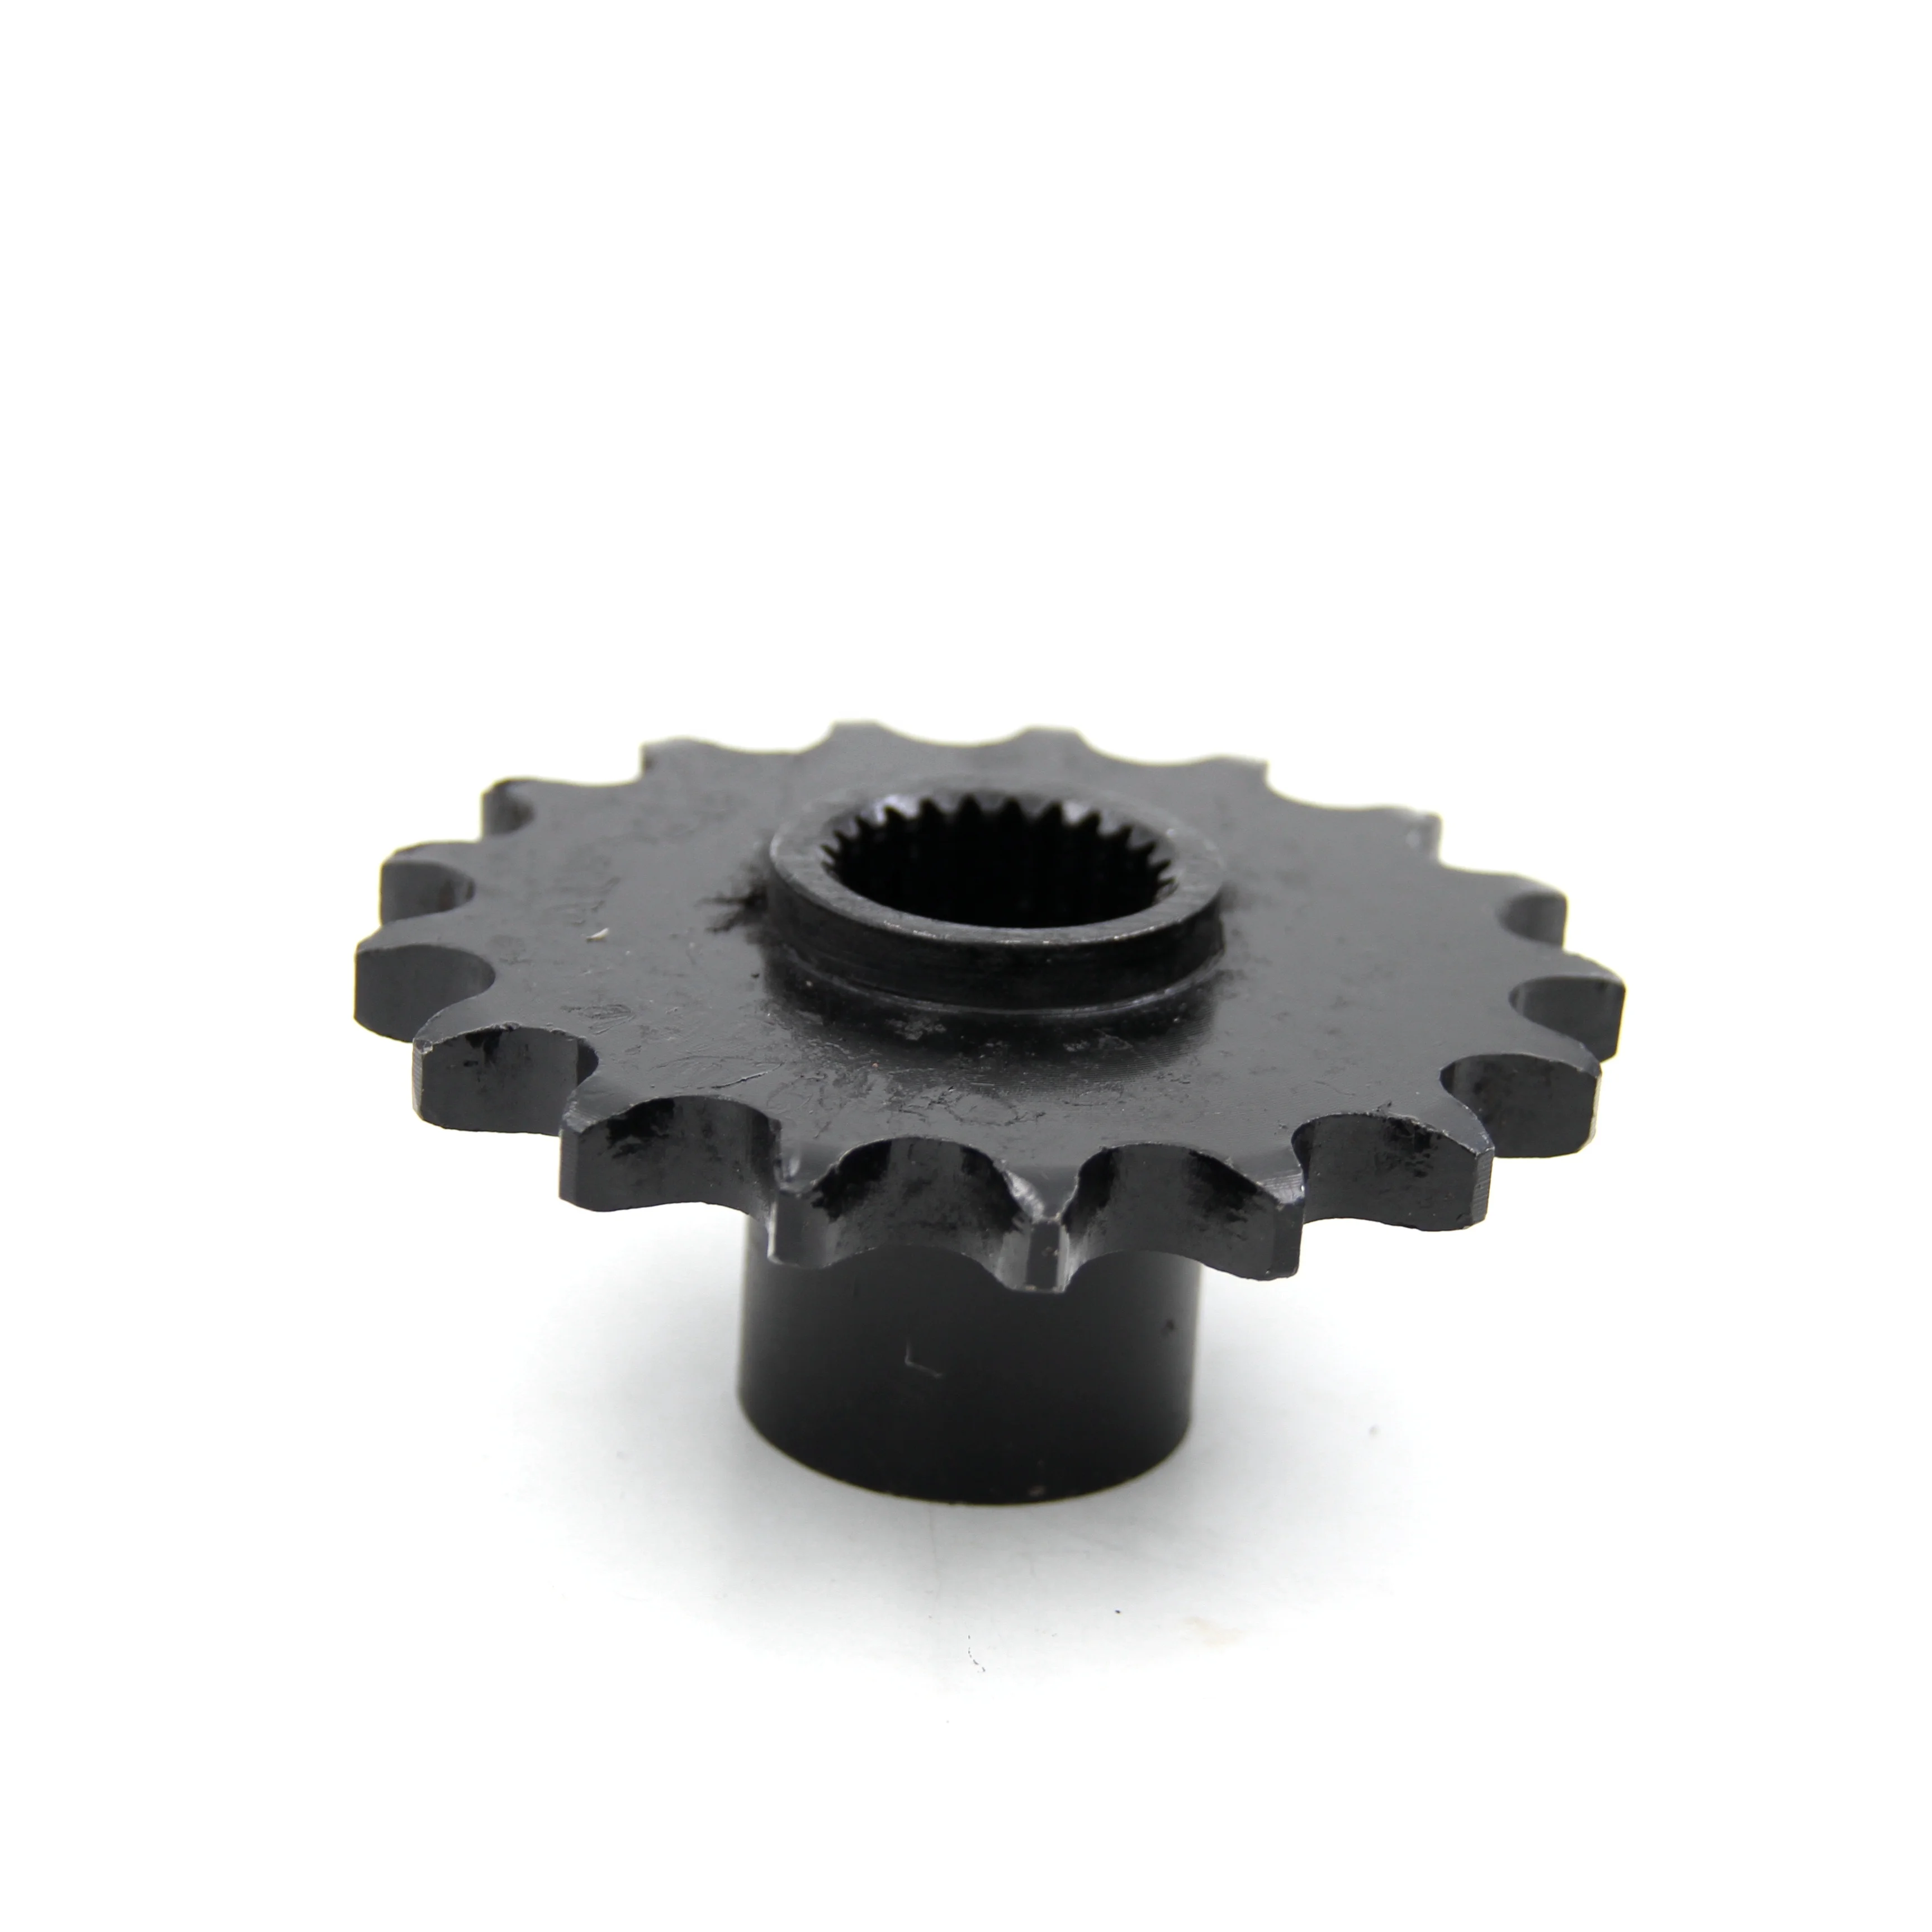 The high quality Front Sprocket 520 17 Tooth For ATV Quad Bike Engine Parts